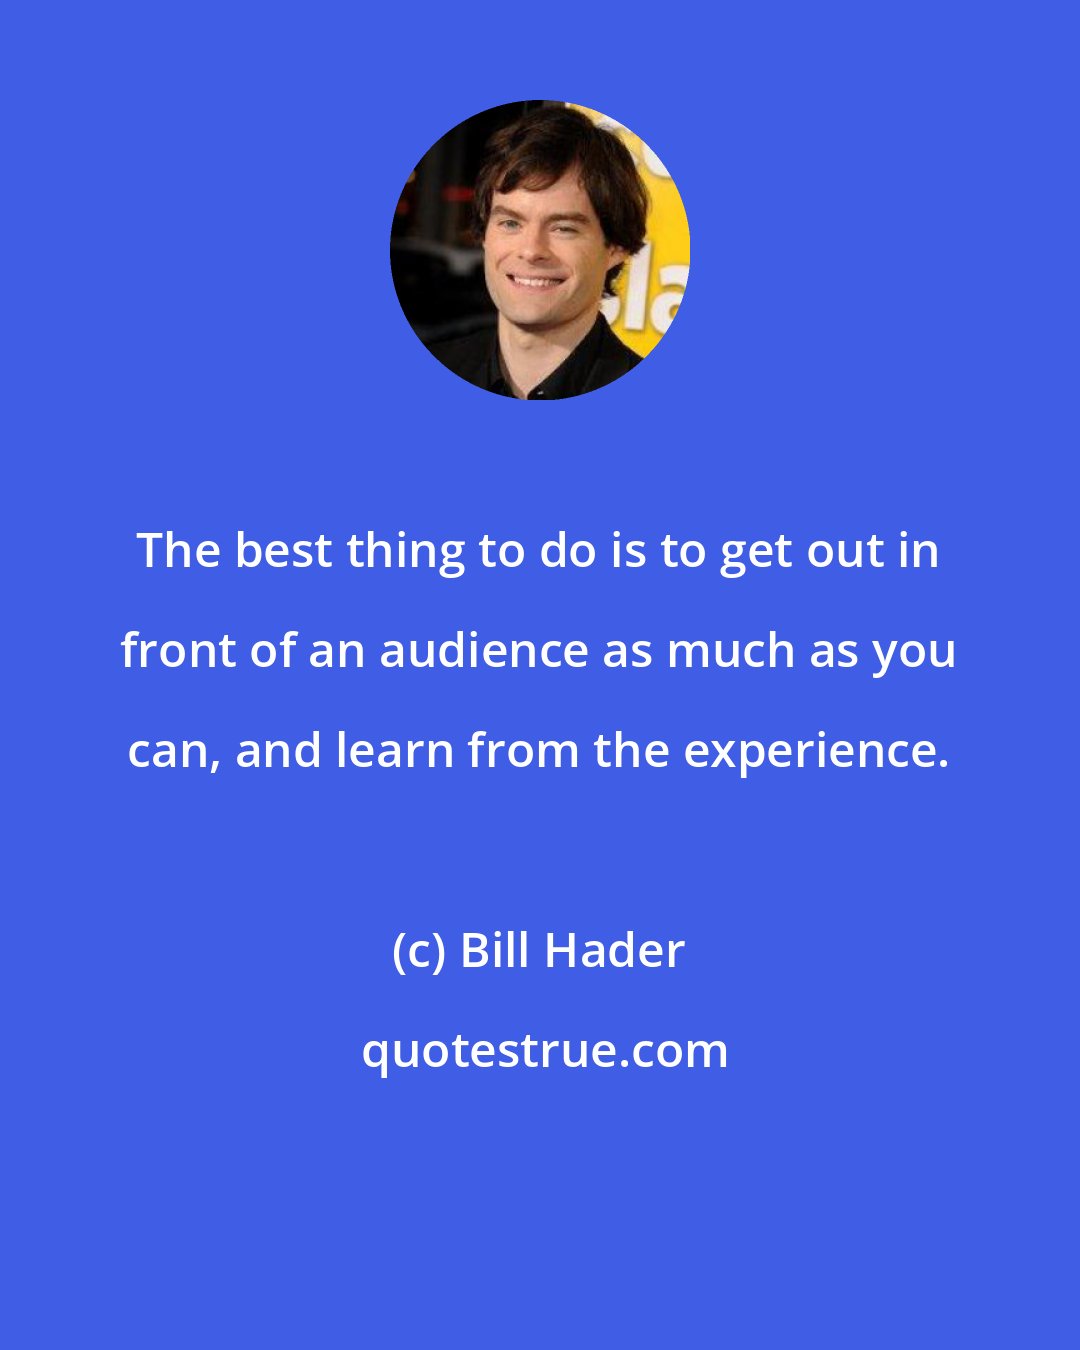 Bill Hader: The best thing to do is to get out in front of an audience as much as you can, and learn from the experience.